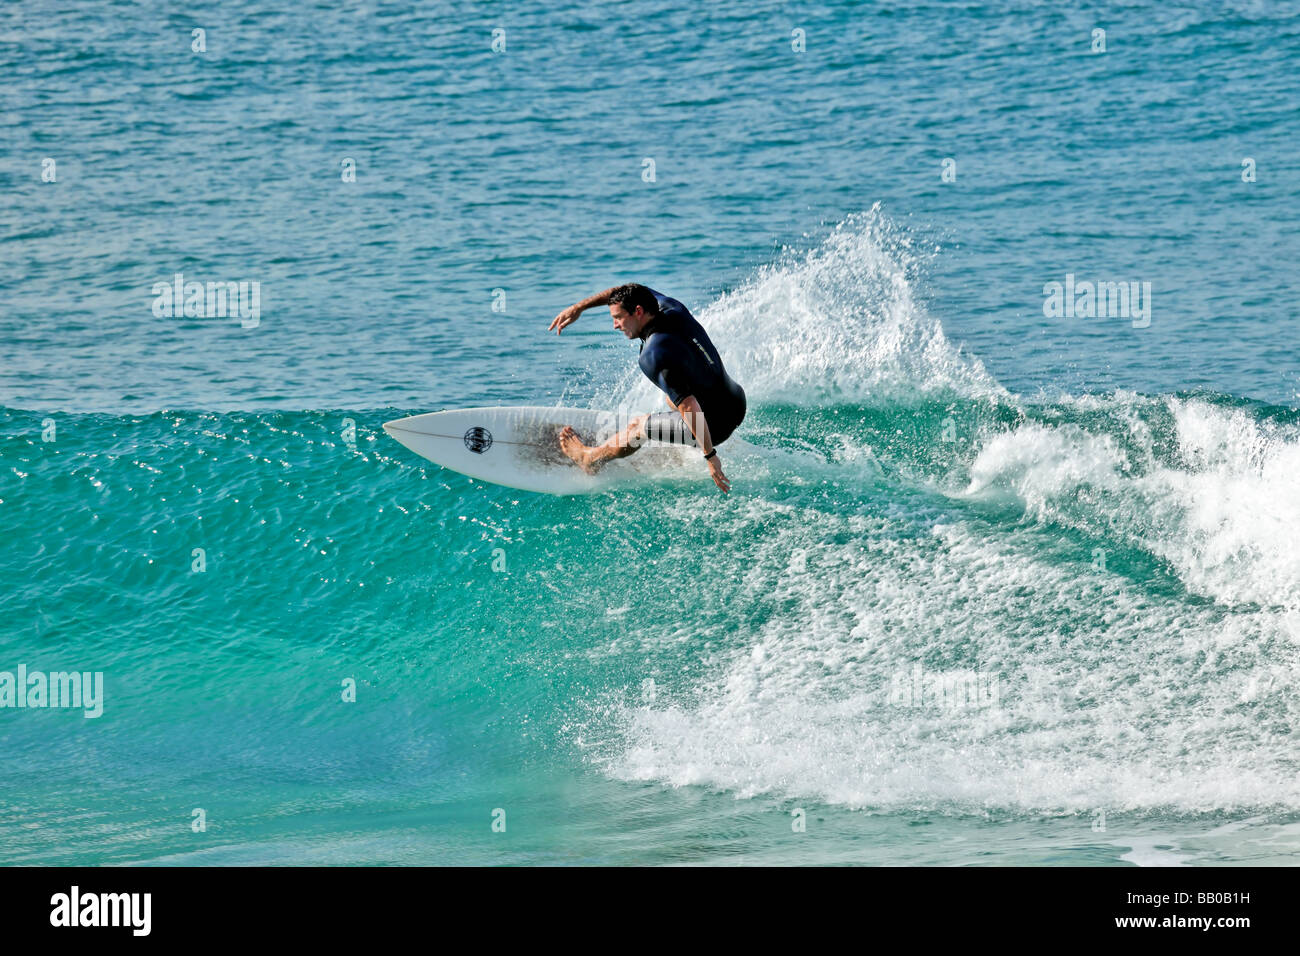 Male surfer on a surfboard catches a wave Stock Photo